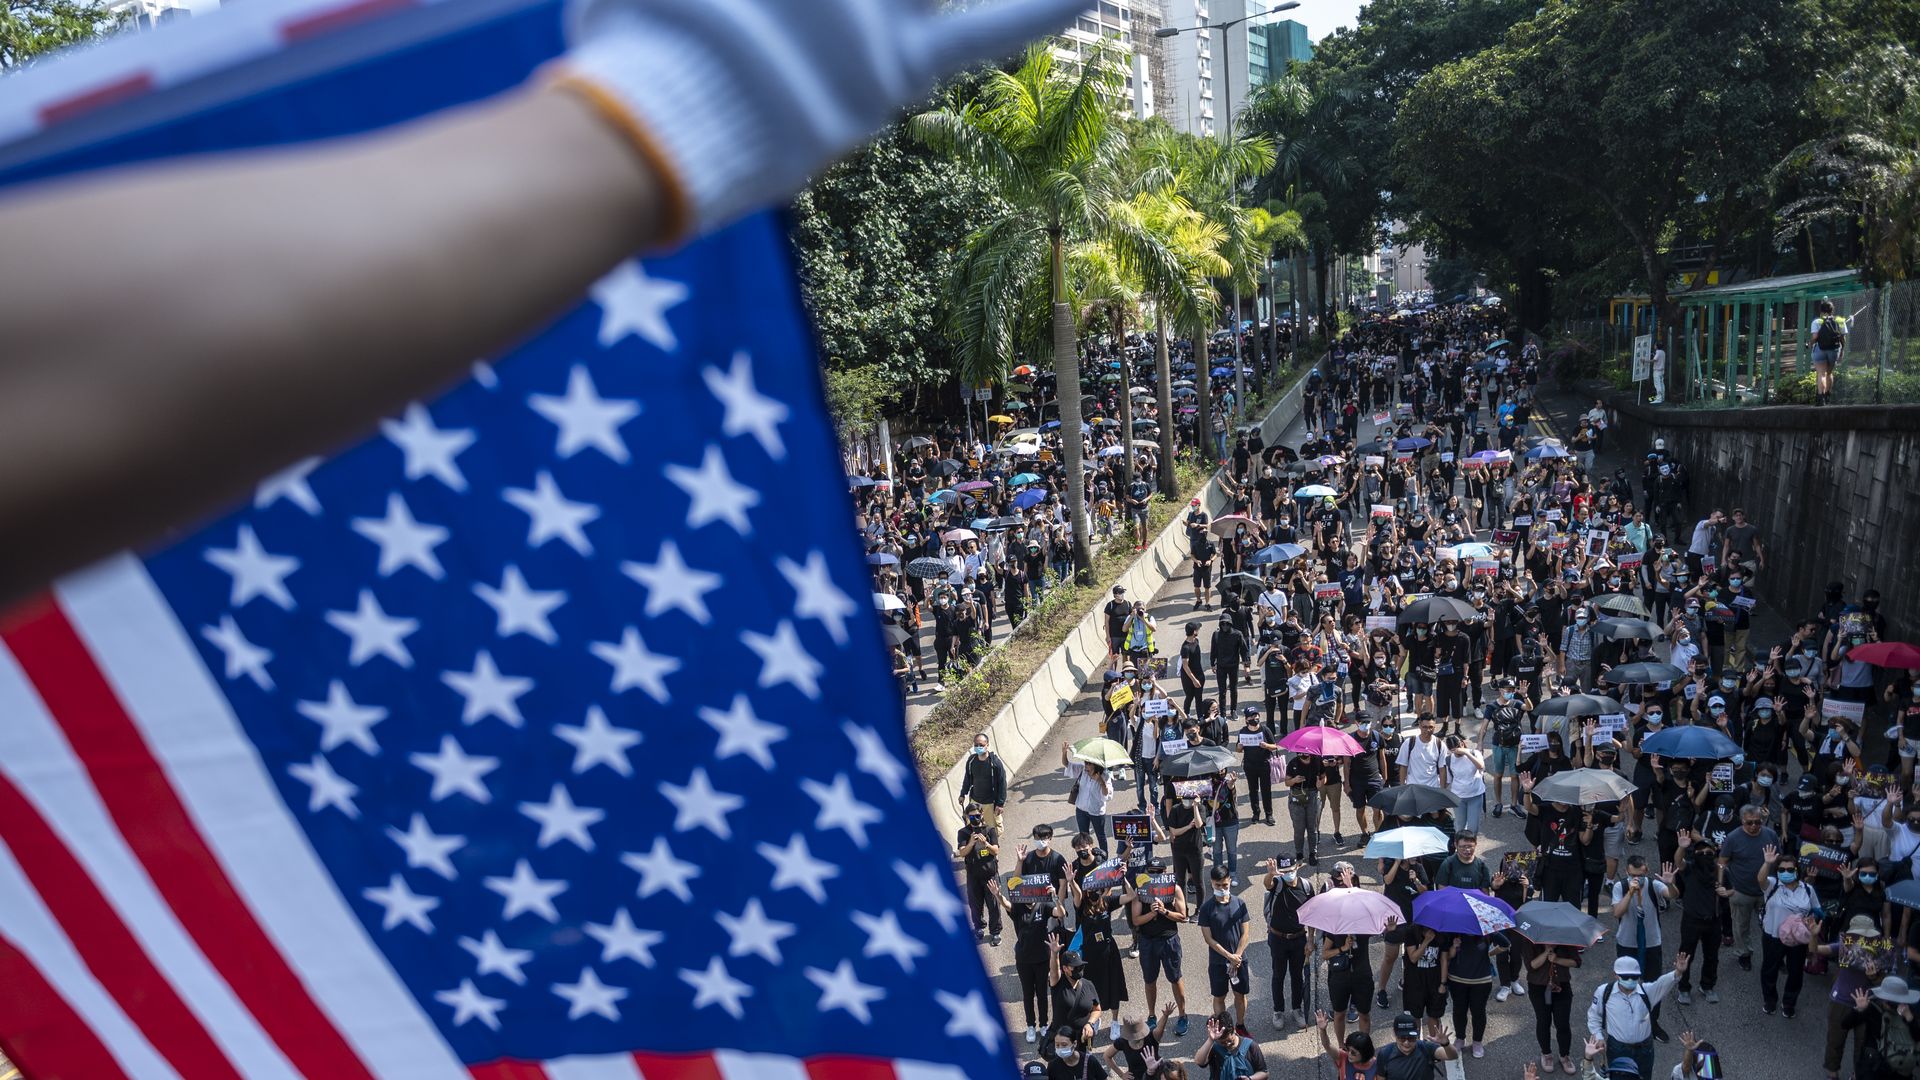 A Protester is seen holding up a US Flag above other protester during an Anti-Government Protest in Tsim Sha Tsui district in Hong Kong, China, October 20